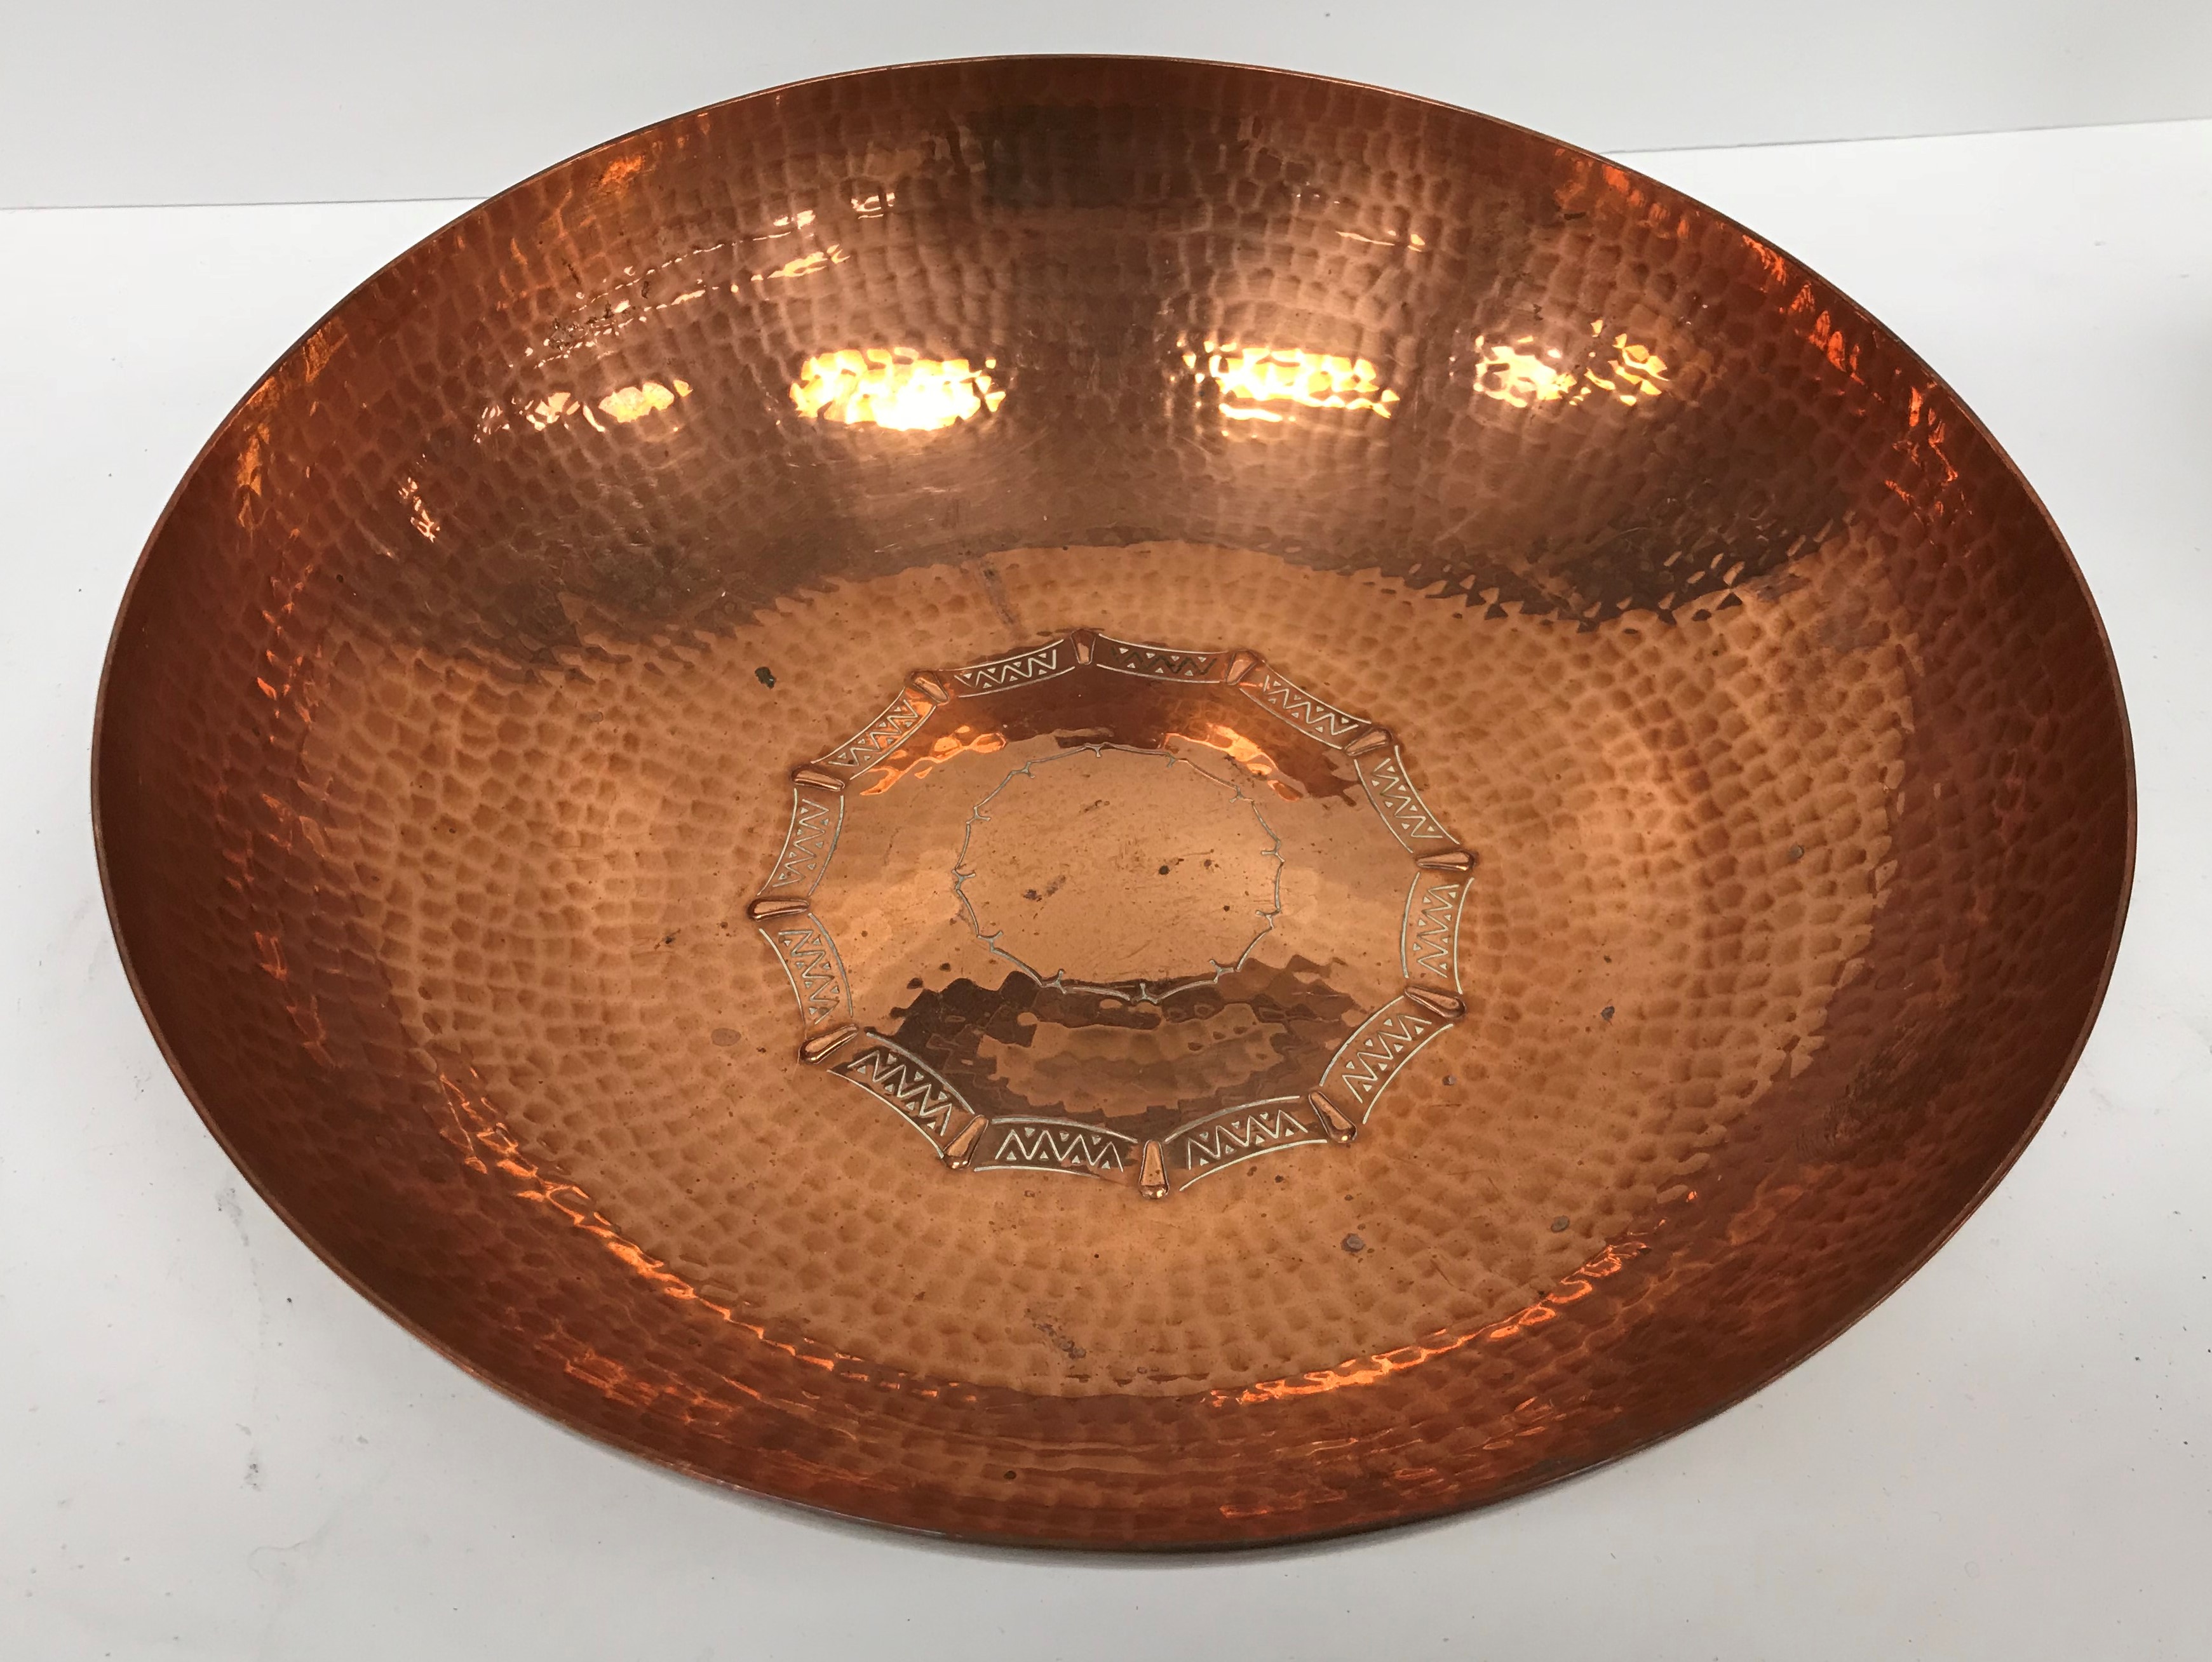 A copper bowl with hammered decoration, inscribed "LRI Borrowdale" hand-beaten to base, - Image 2 of 5